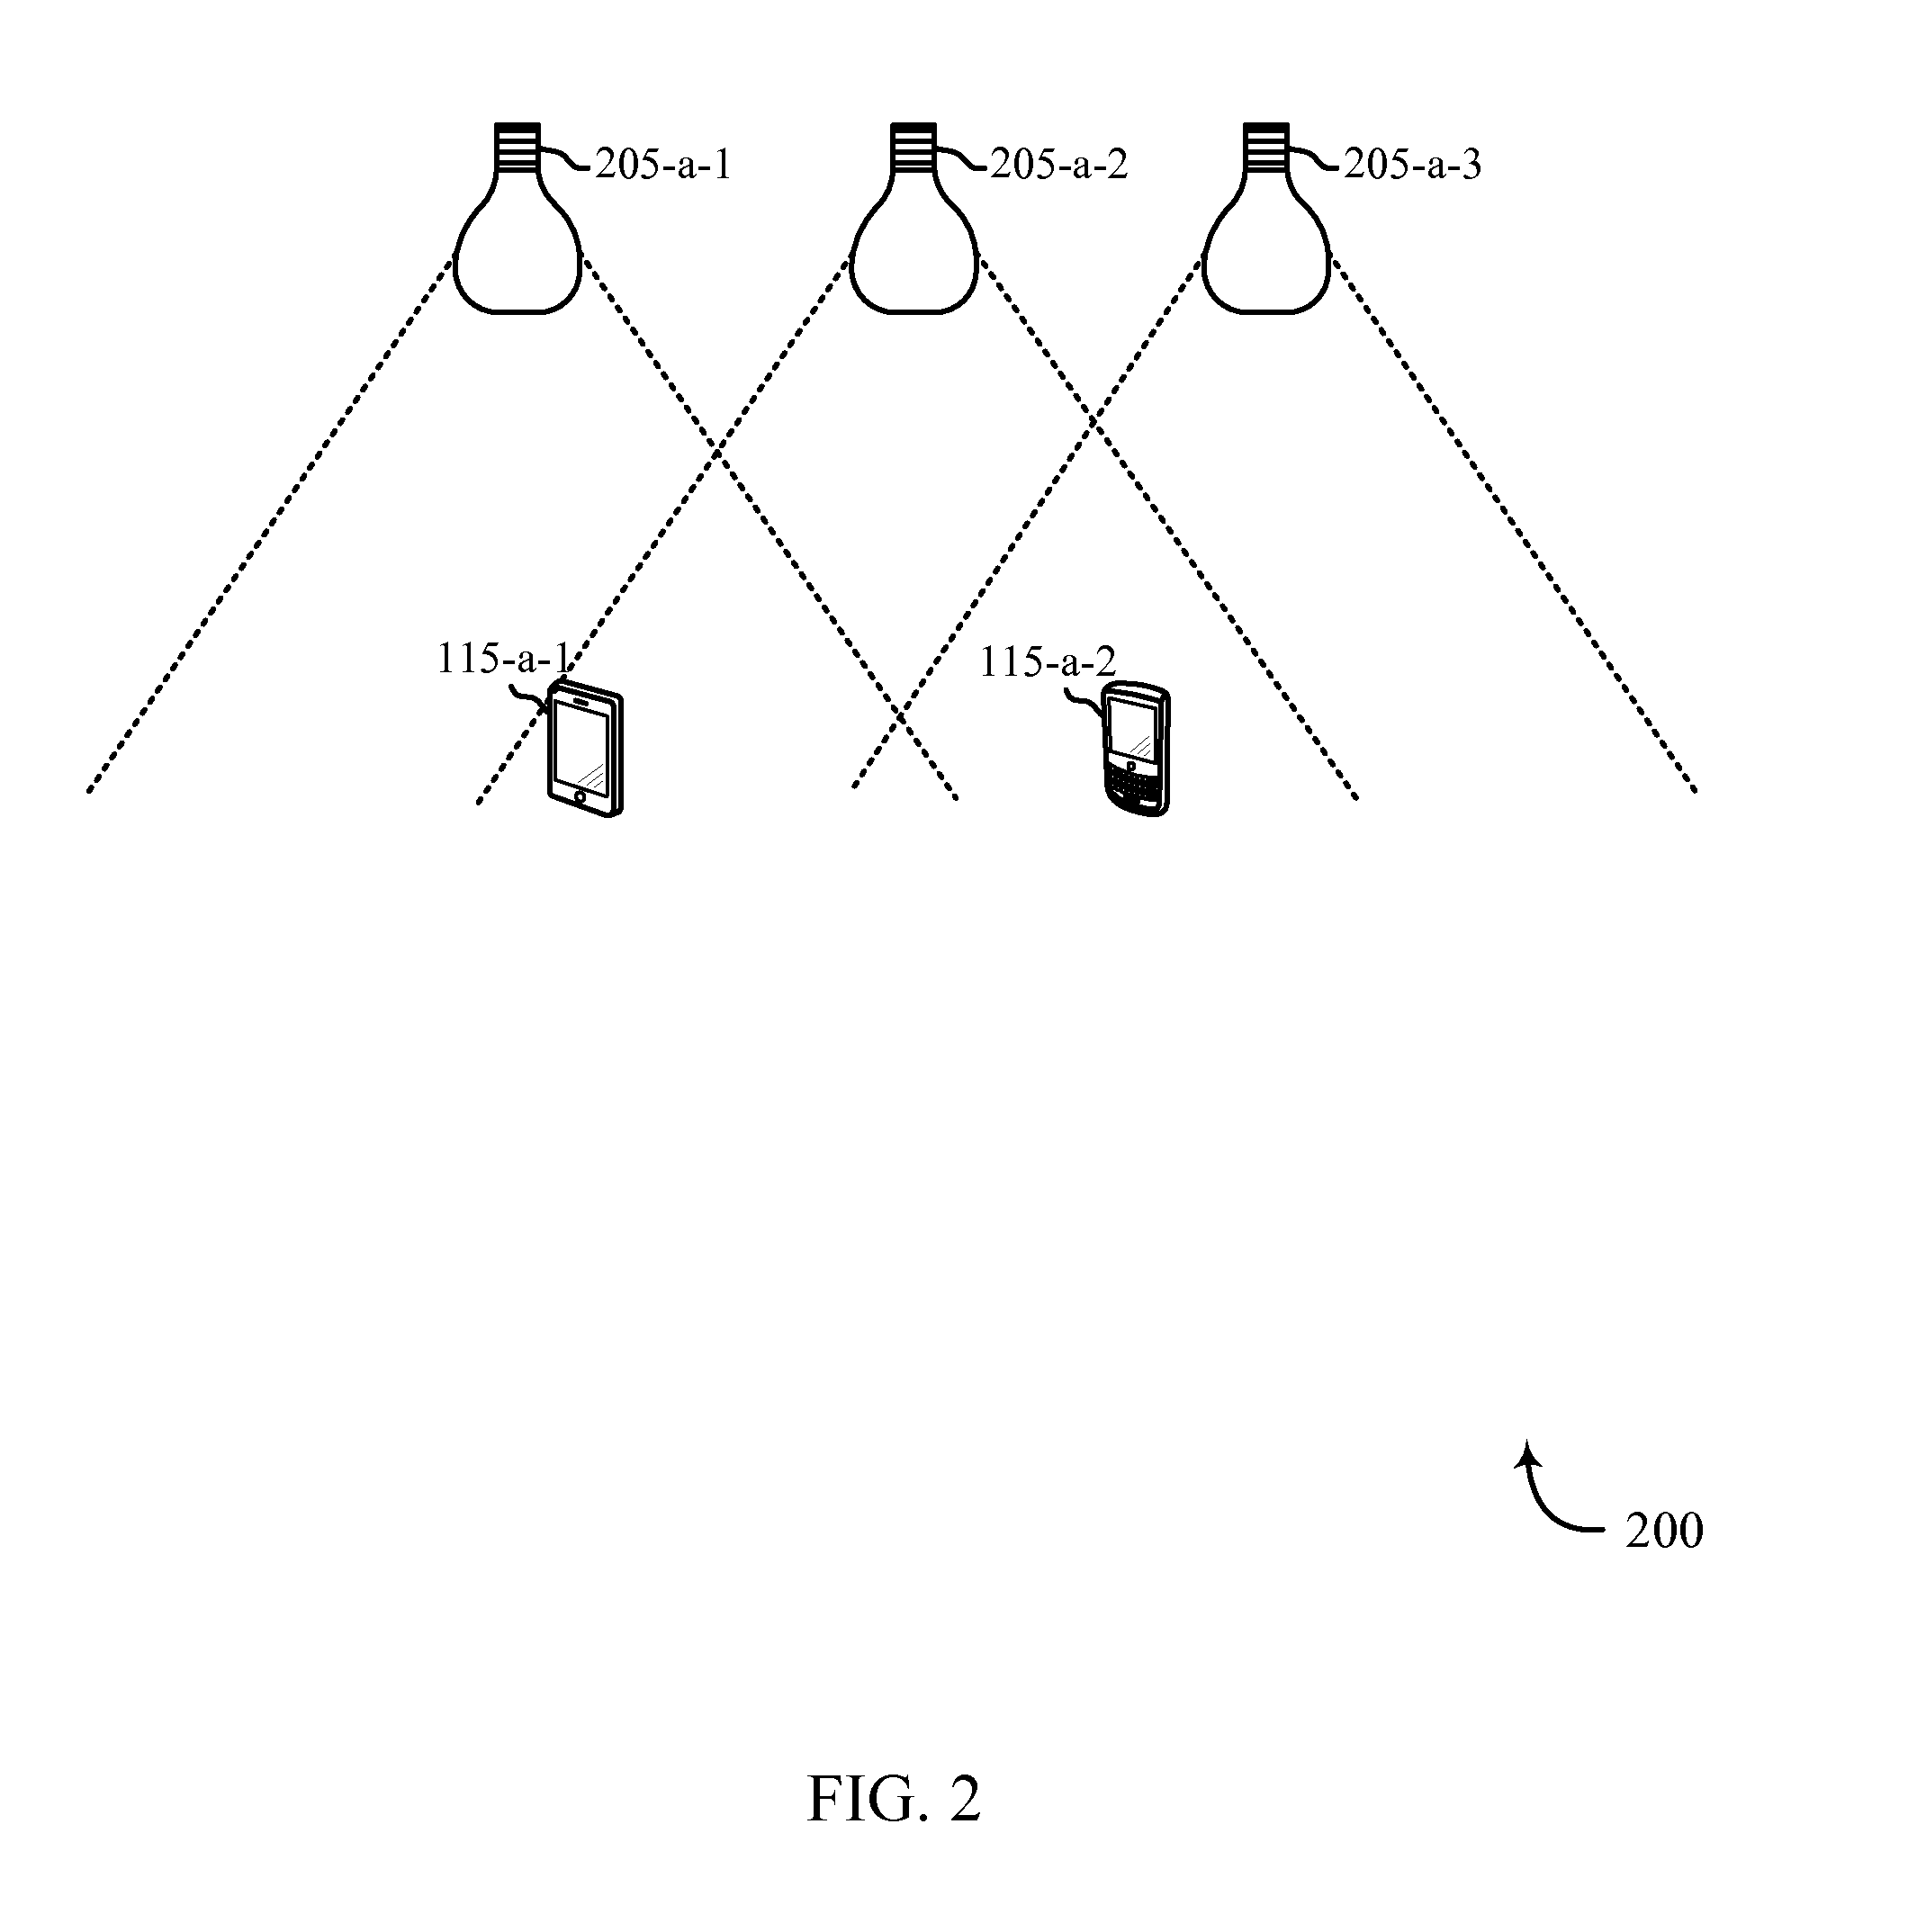 Determination of positioning information of a mobile device using modulated light signals